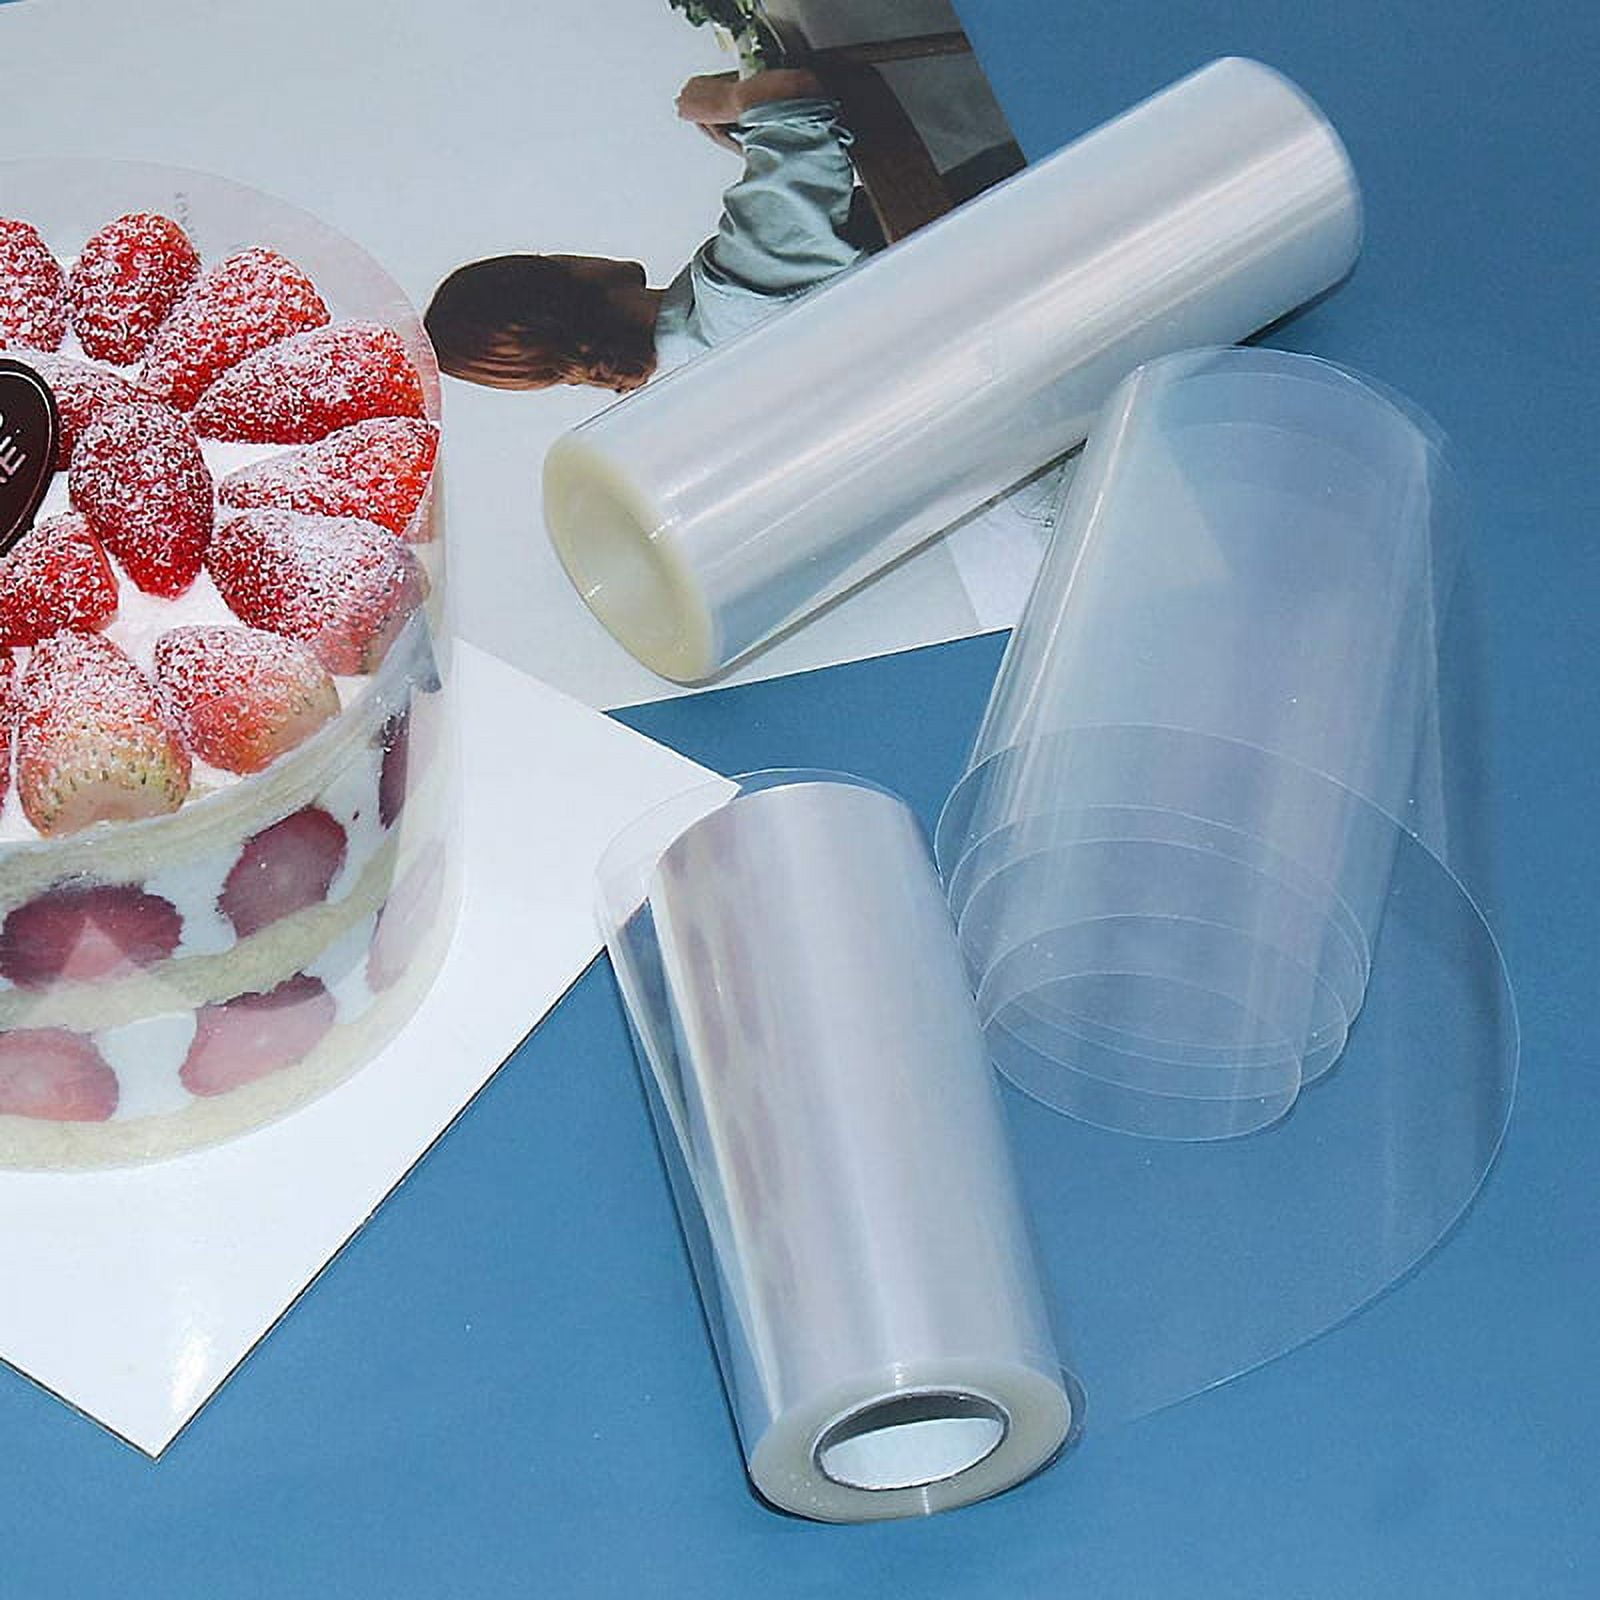 plastic cake wrap 3 inch clear transparent colors PET plastic Band Strip  wrapping wrapper roller around cakes outside